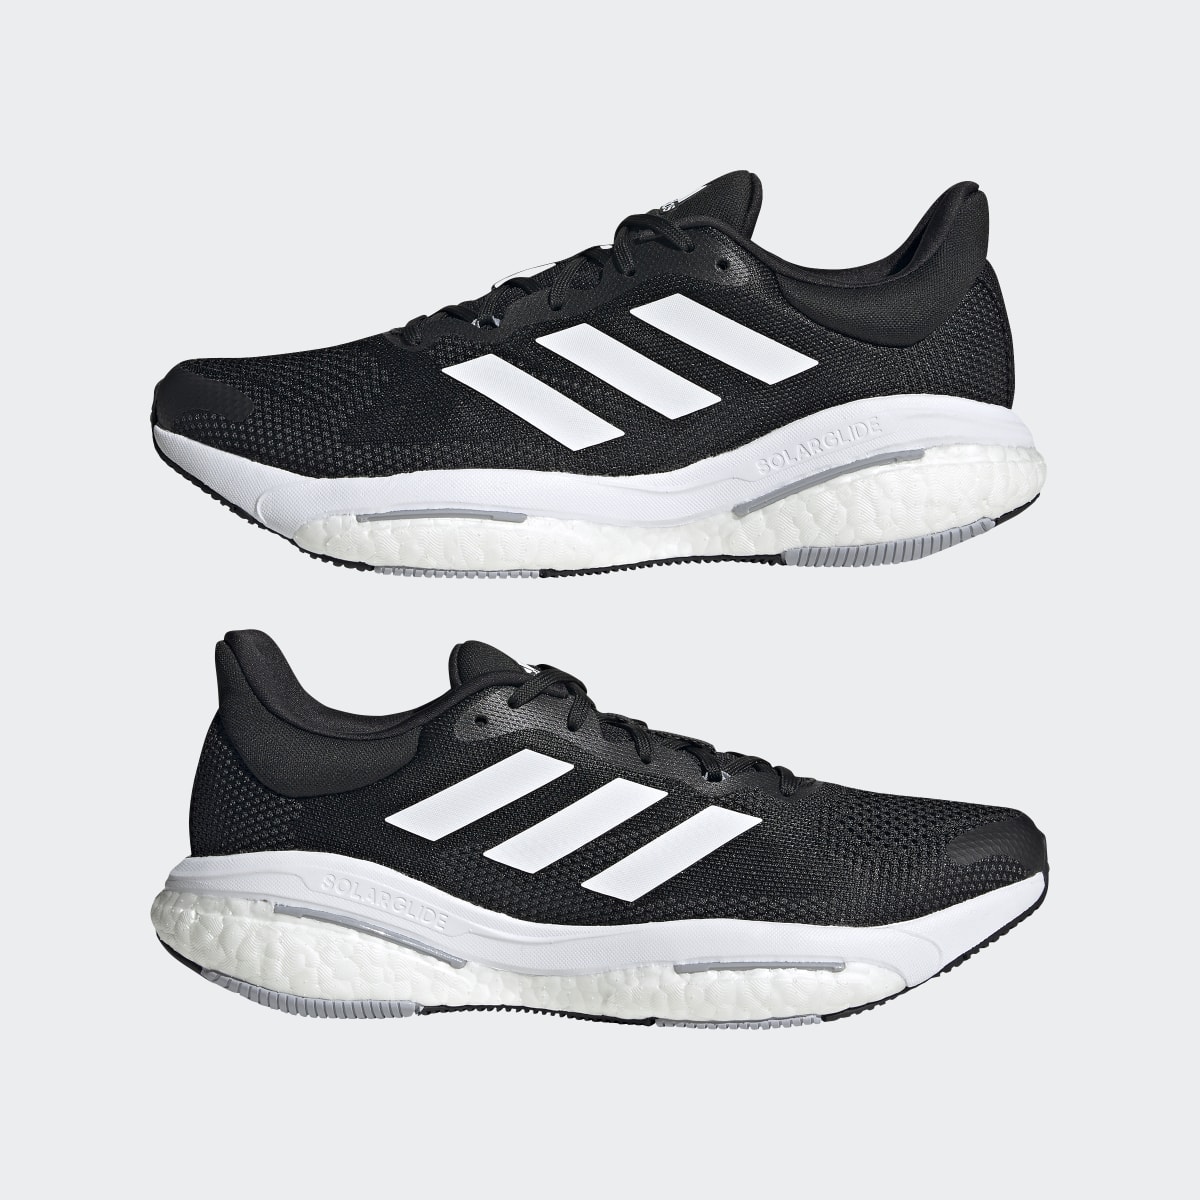 Adidas Solar Glide 5 Shoes Wide. 11